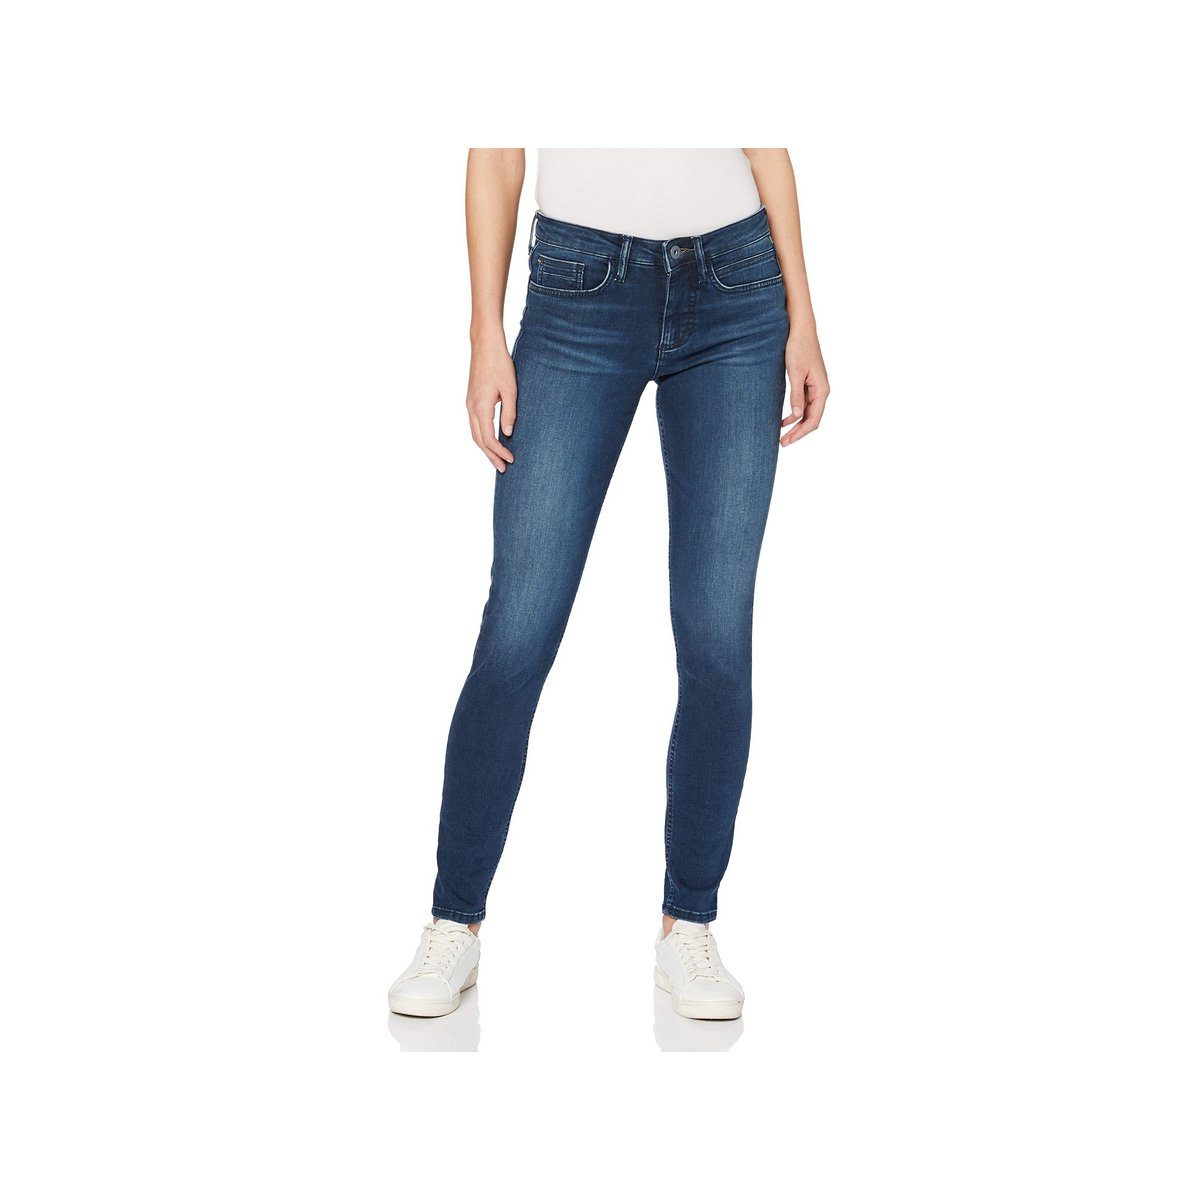 active (1-tlg) camel fit Skinny-fit-Jeans hell-blau skinny